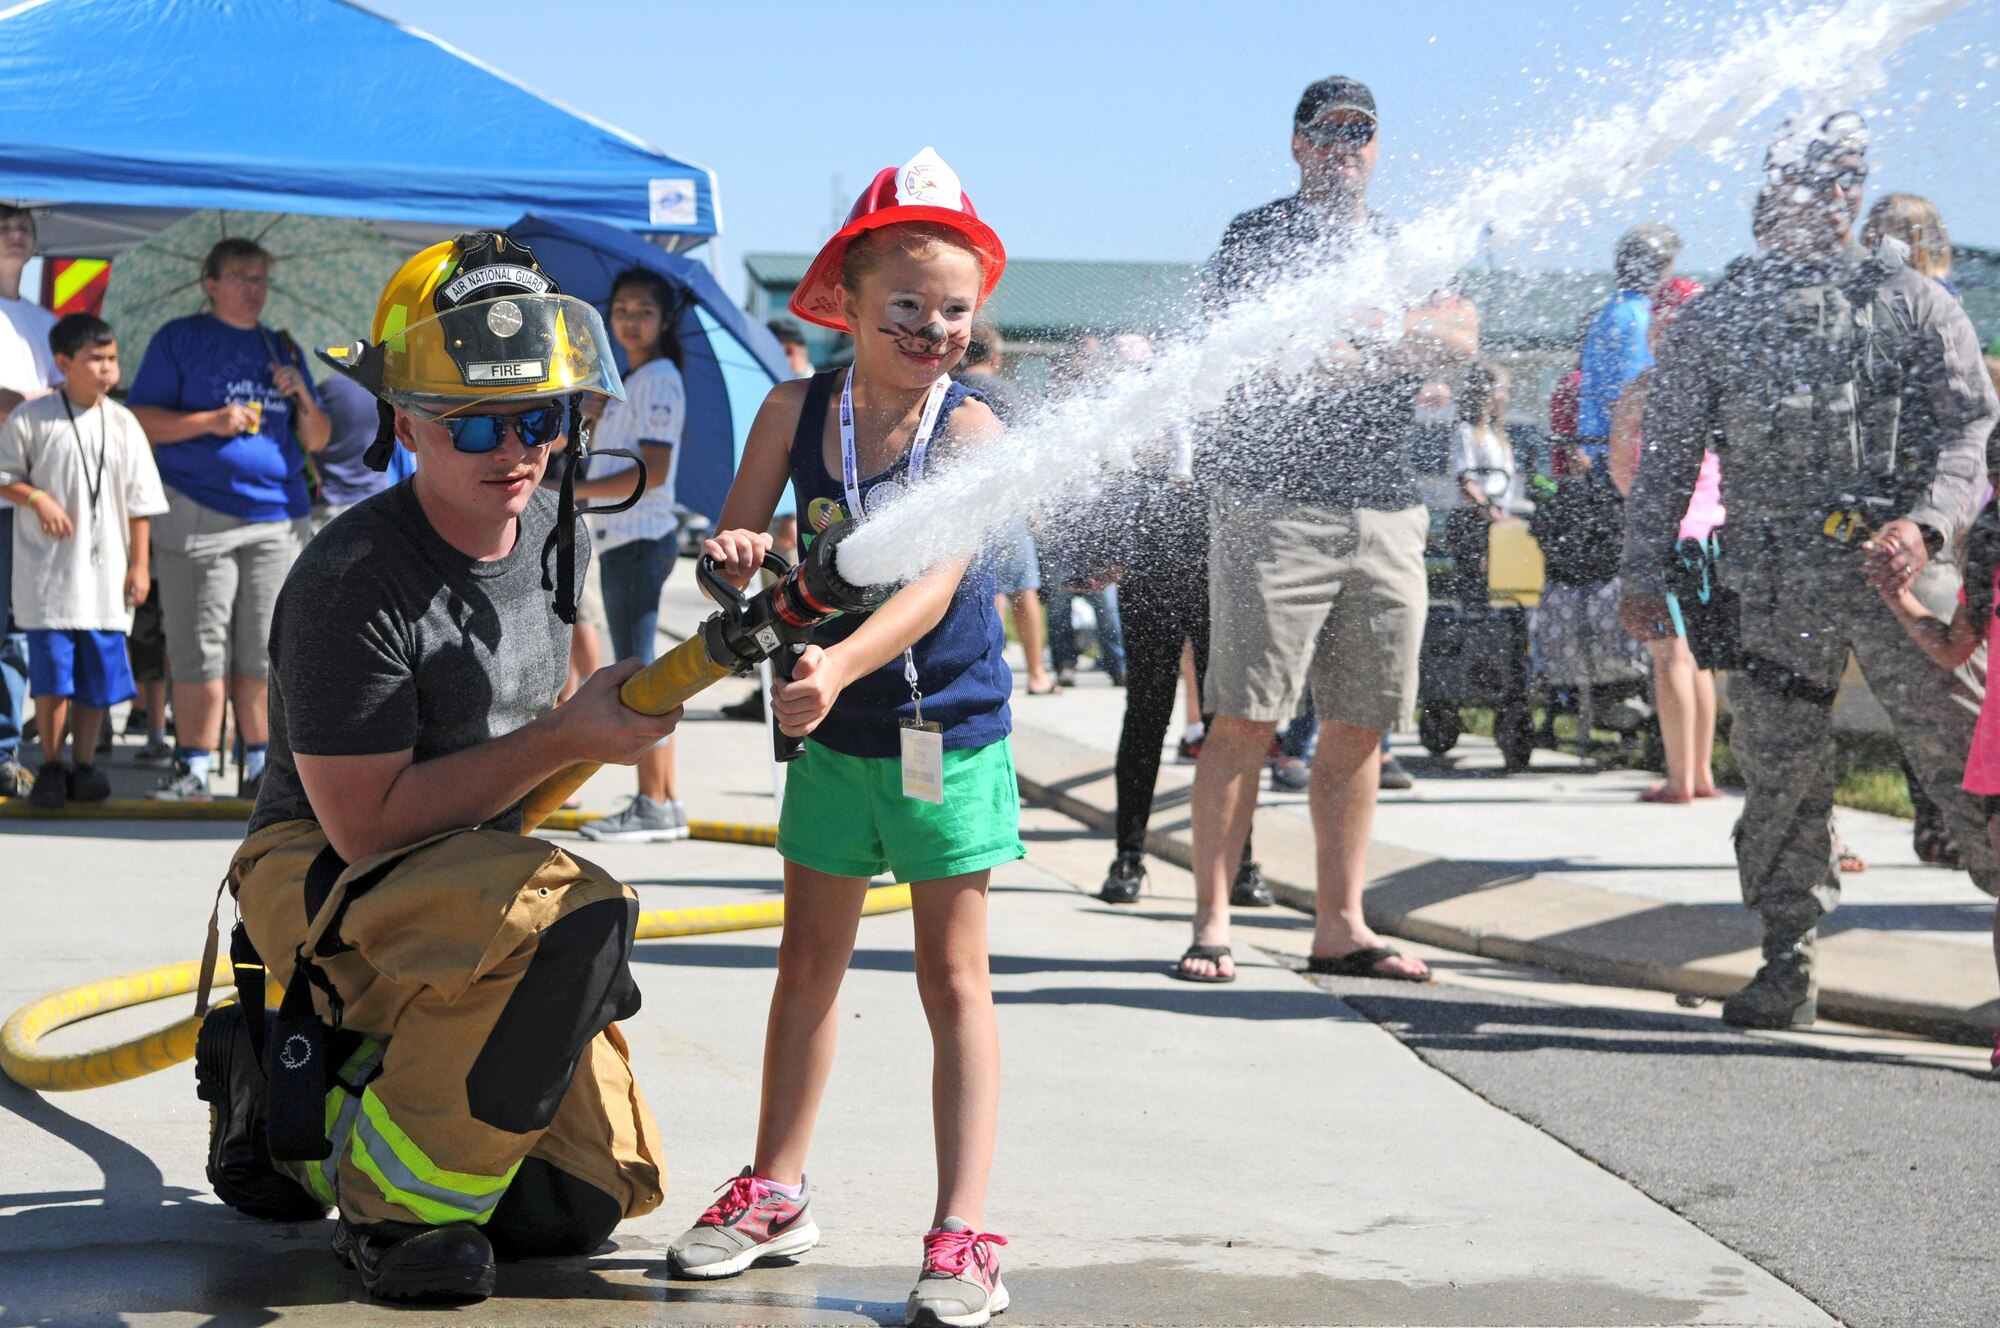 Senior Airman Brody Sanzone, a firefighter with the 151st Civil Engineering Squadron, helps a young girl direct a fire hose toward an orange traffic cone to simulate extinguishing a fire during Wingman Day on June 10, 2017 at Roland R. Wright Air National Guard Base in Salt Lake City. (U.S. Air National Guard photo by Tech. Sgt. Amber Monio)